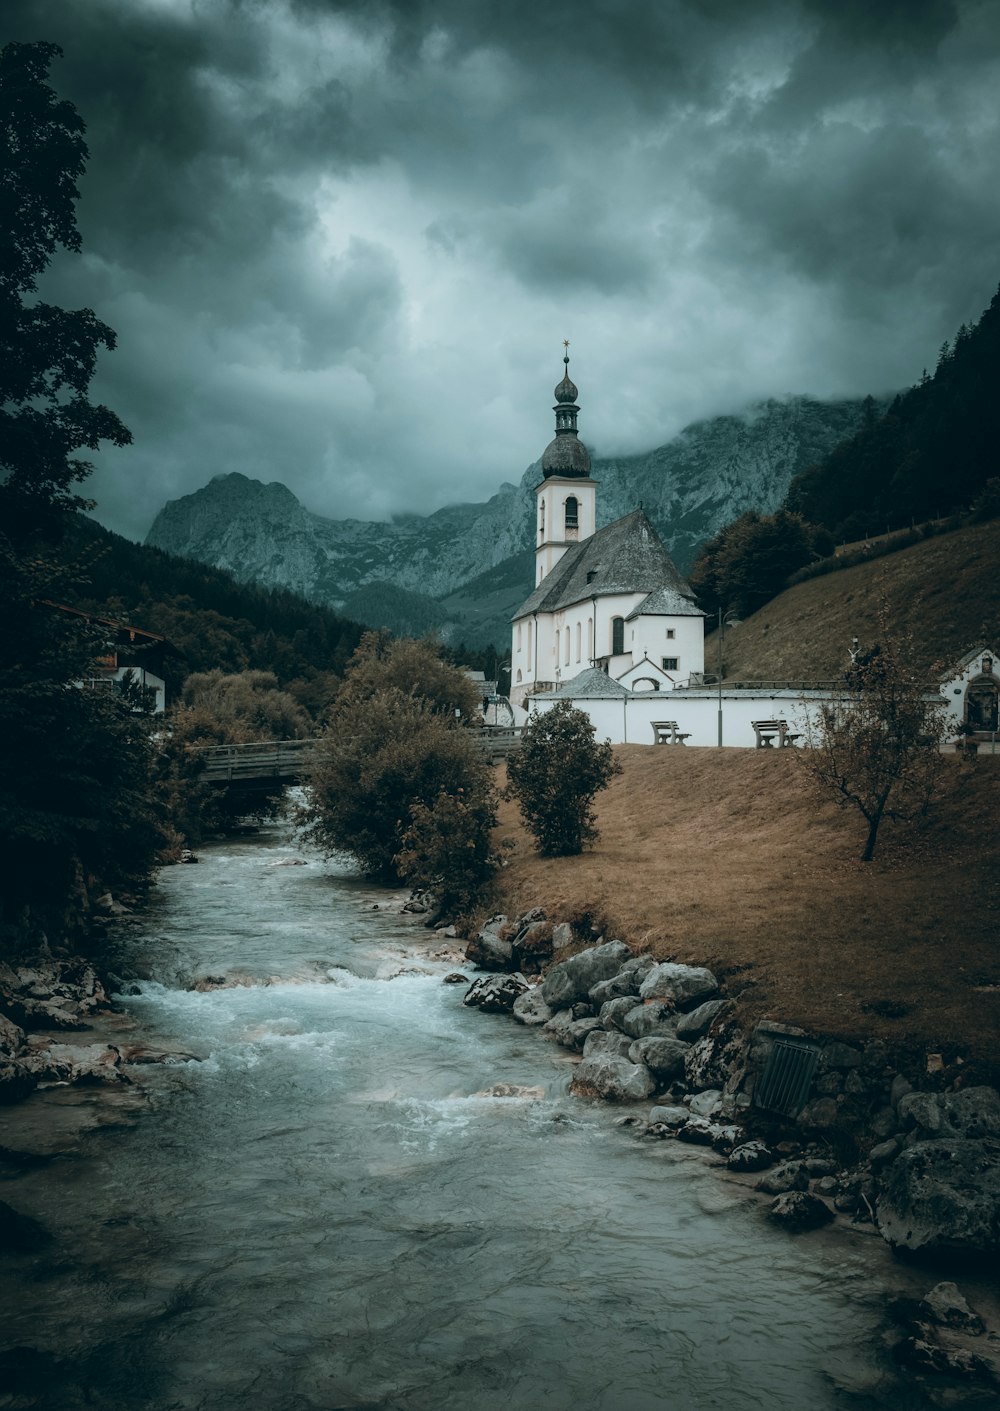 a church on a hill with a river running through it